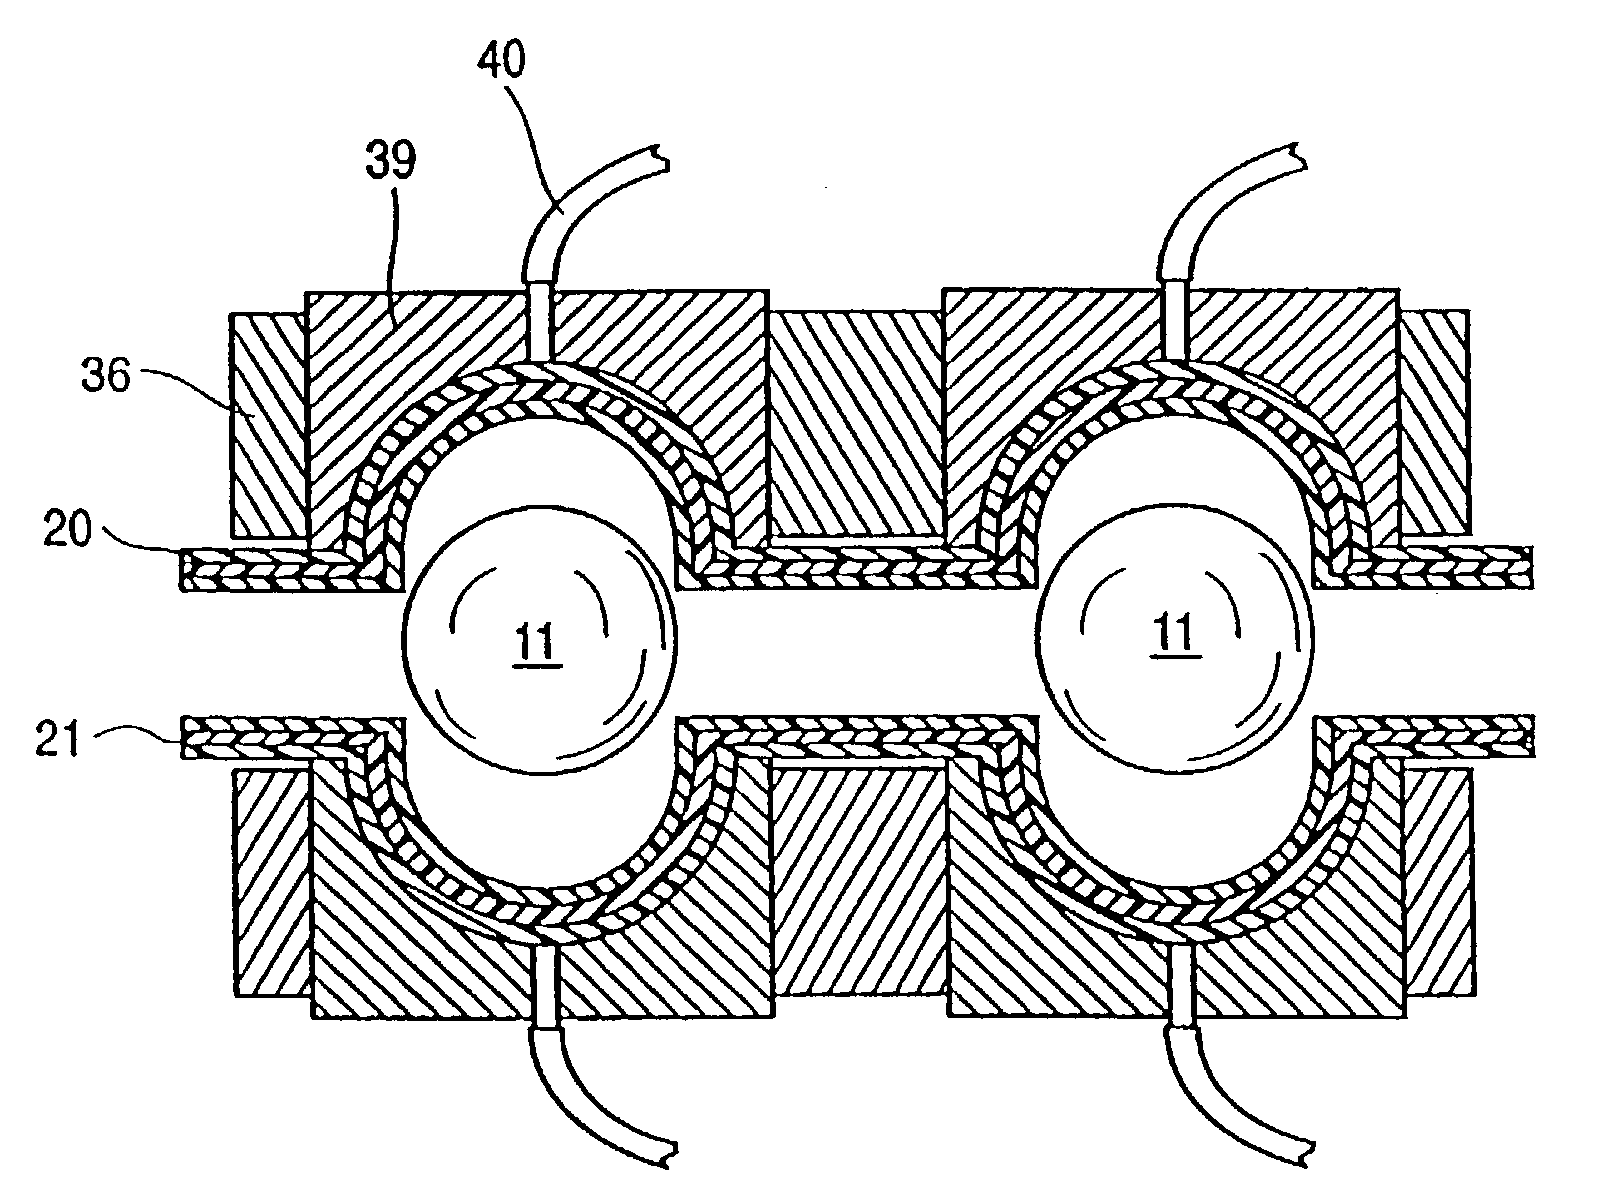 Method of making a golf ball with a multi-layer core